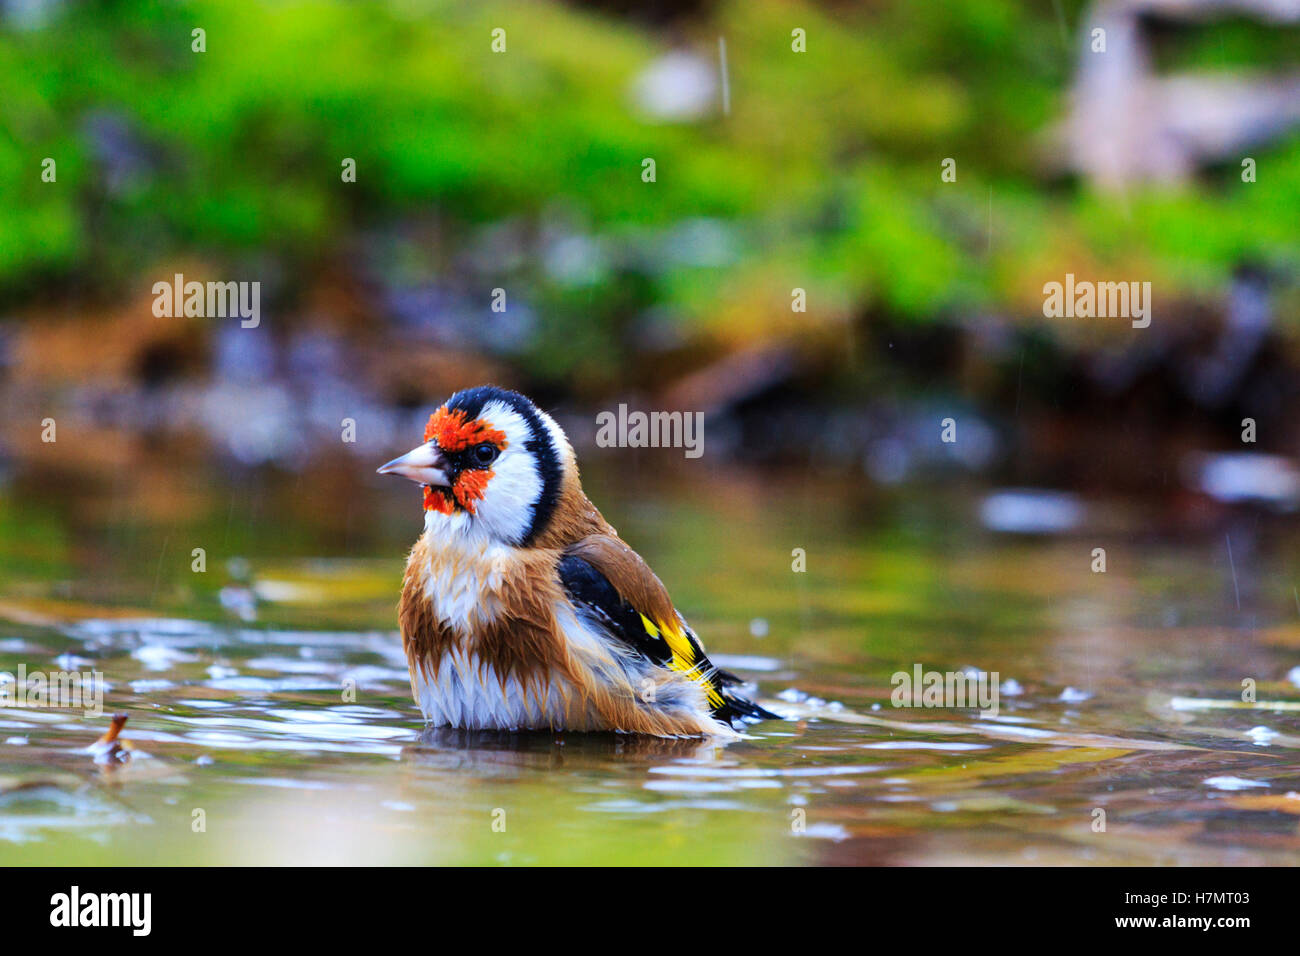 Carduelis carduelis bathing in forest lake,autumn colored bird, unique moment, Stock Photo